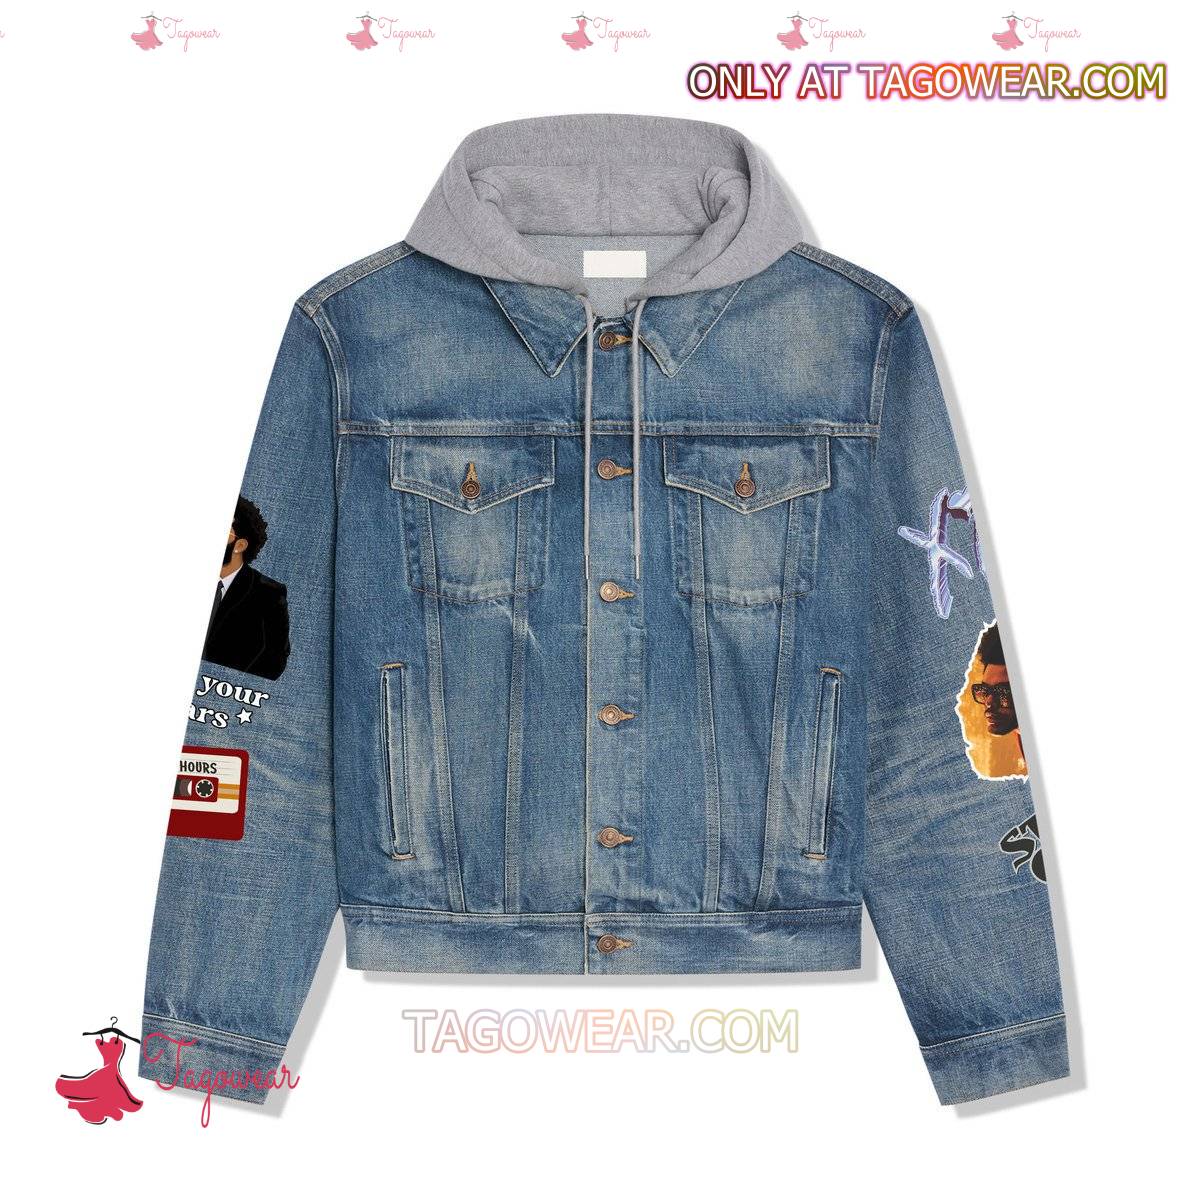 The Weeknd Songs Blinding Lights, Save Your Tears, After Hours Jean Hoodie Jacket a